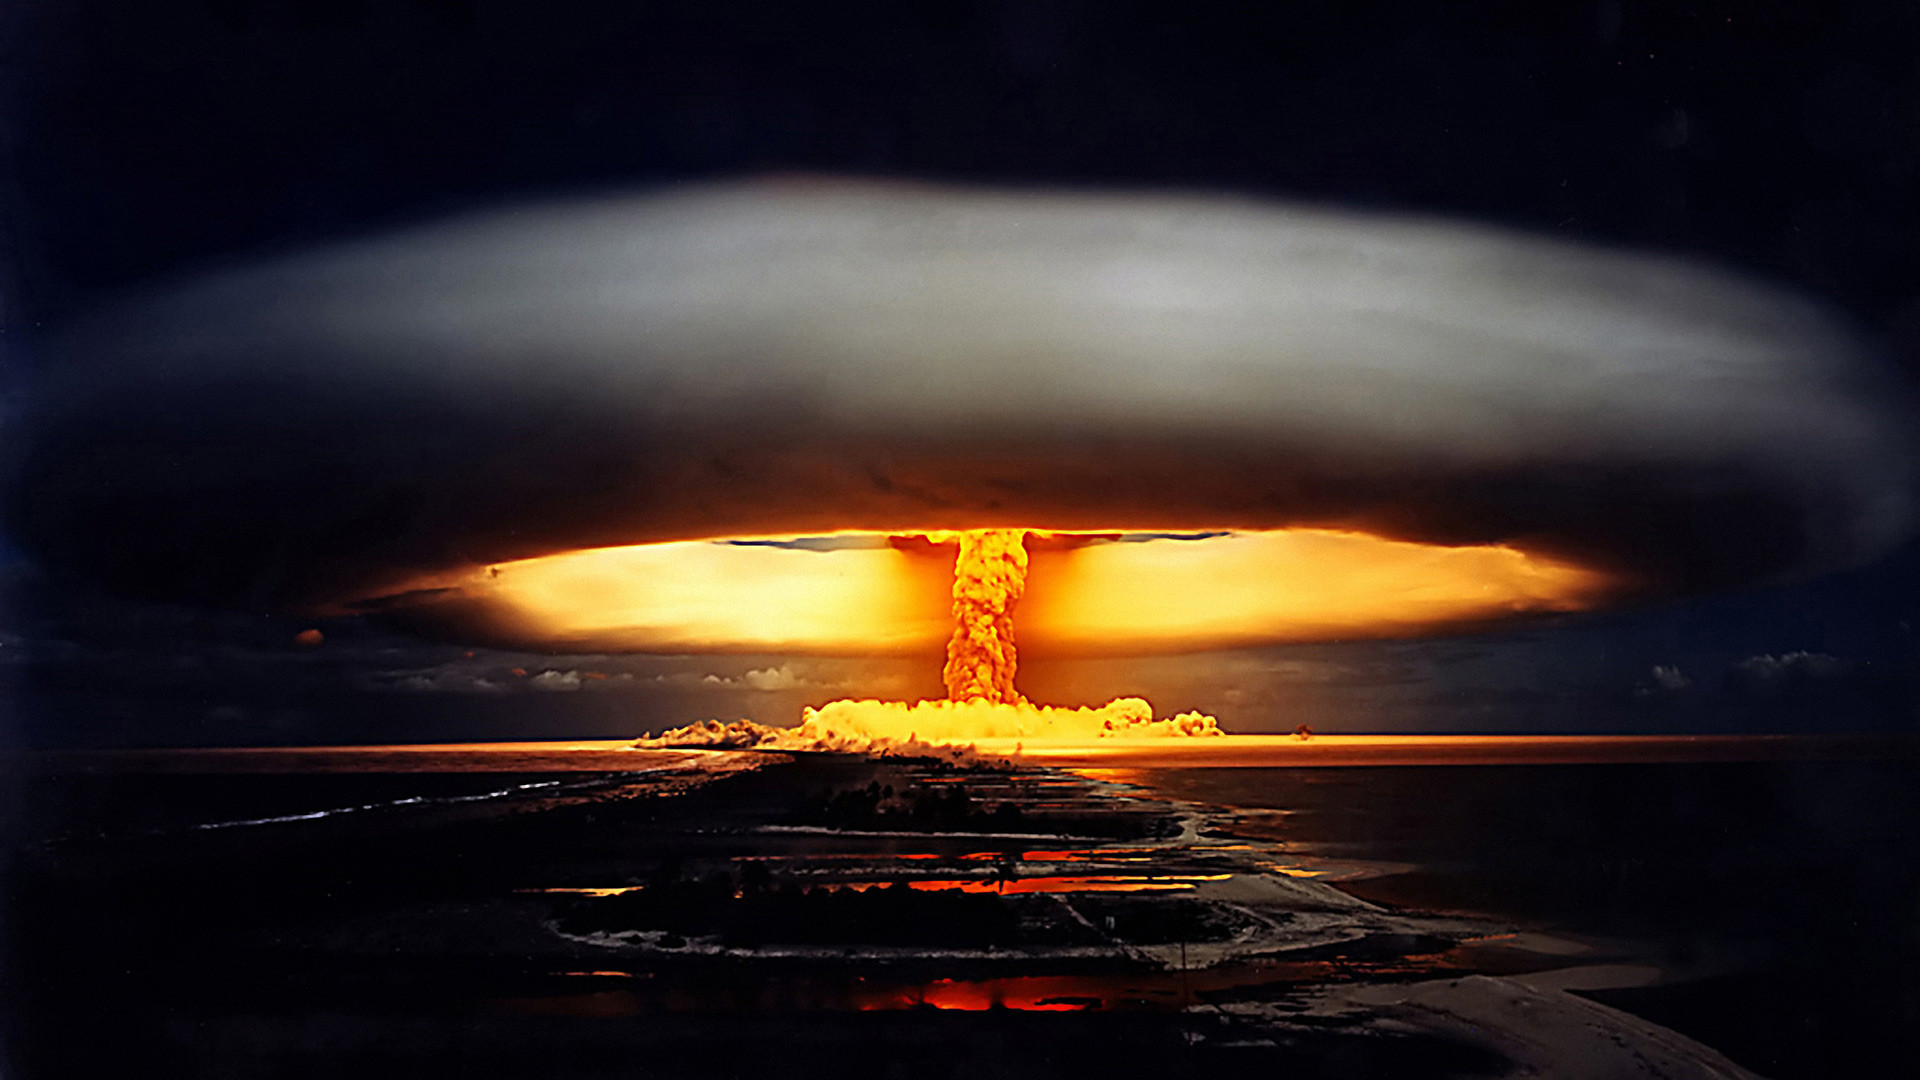 A nuclear mushroom is always a breathtaking yet deadly view.